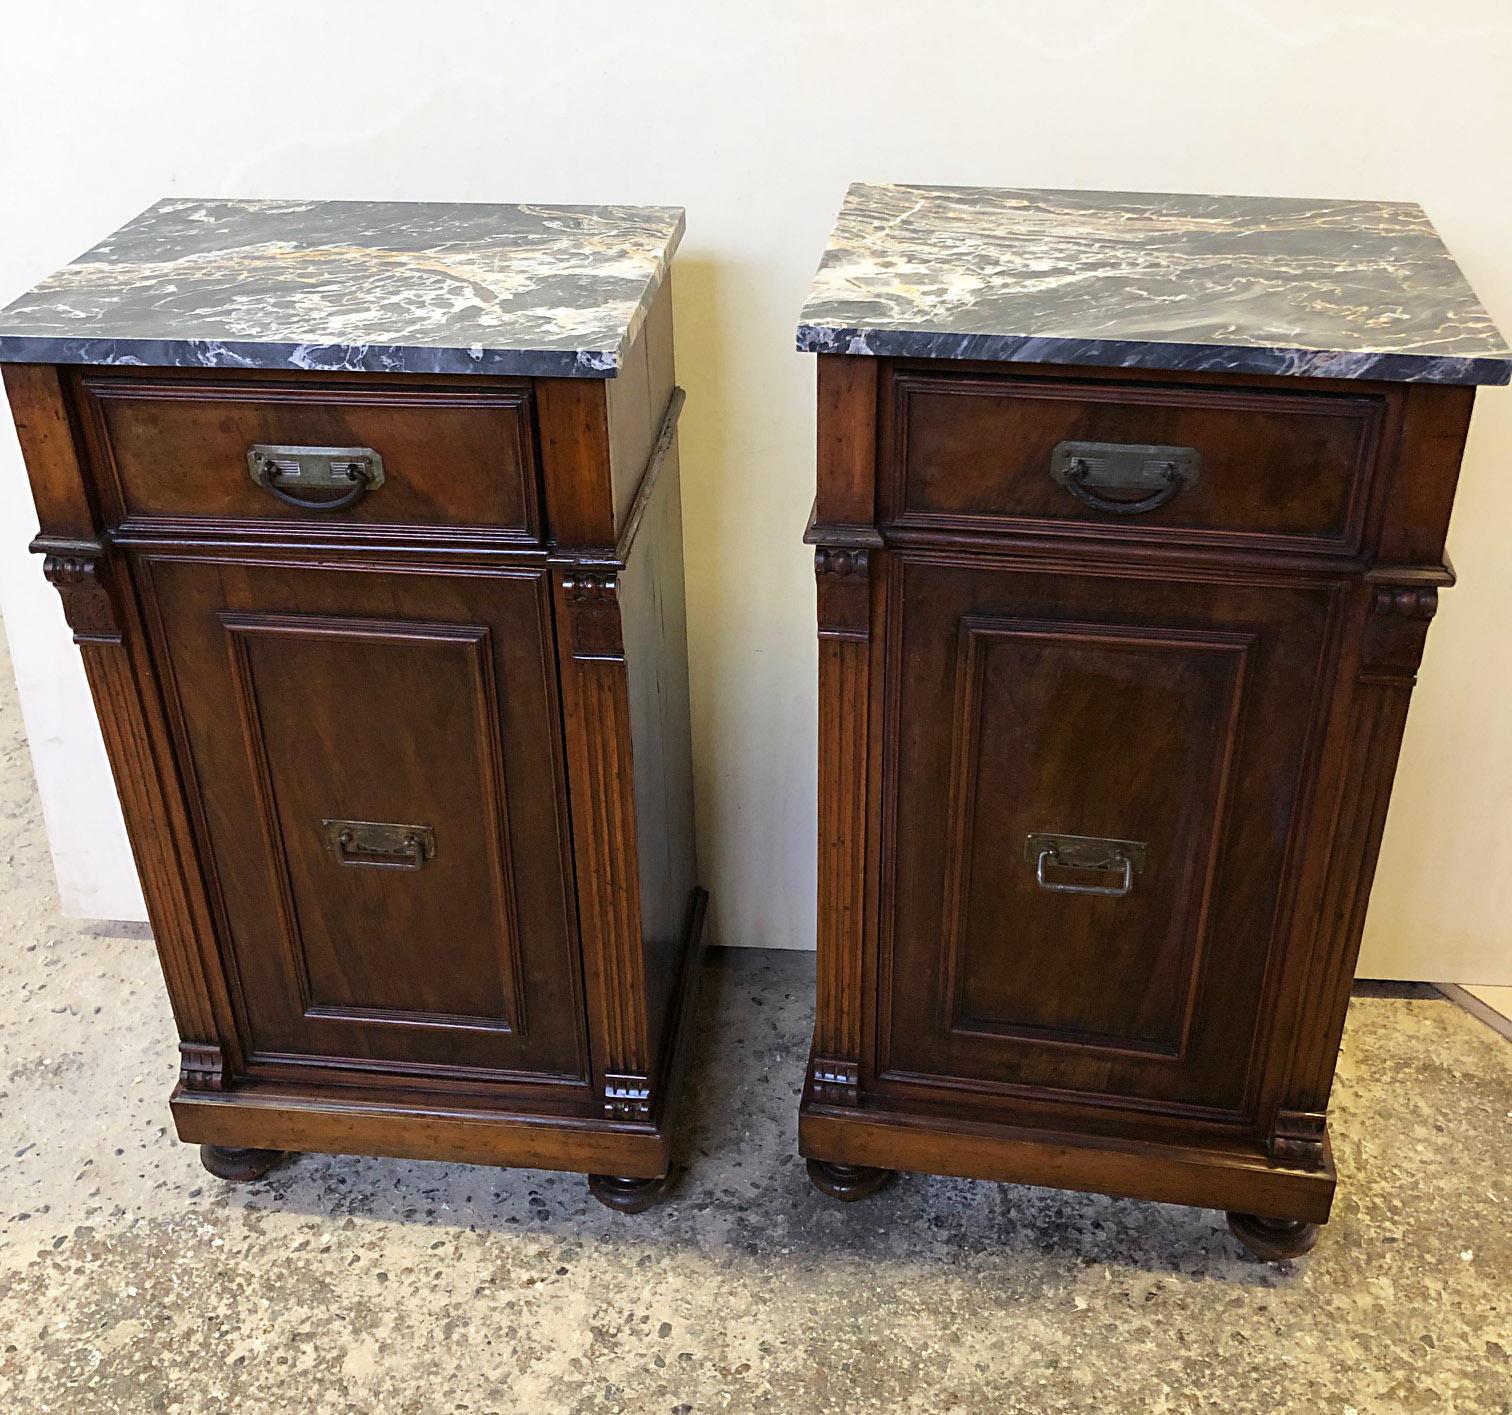 Country Pair of Italian Walnut Bedside Tables from 1880, Natural Color Portoro Marble